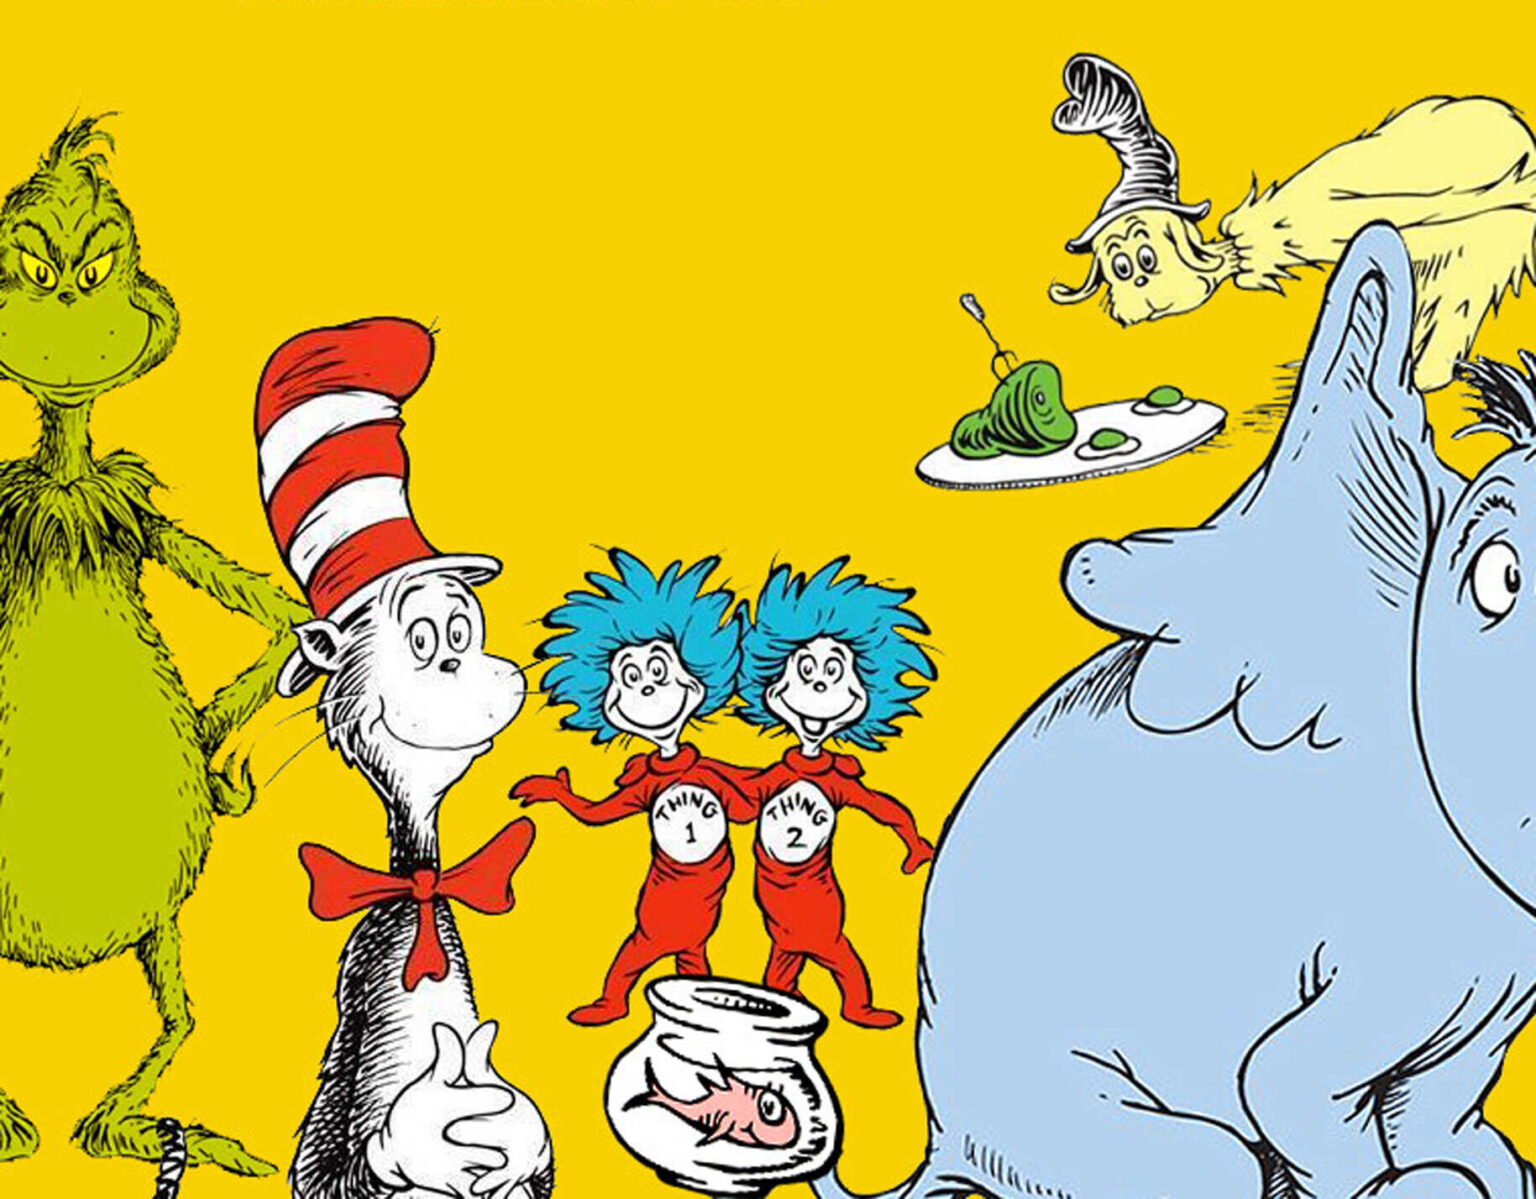 Schools are gearing up for a fun Dr. Seuss Day, but should the cherished children's author be celebrated? Here's the scoop on the Dr. Seuss controversy.